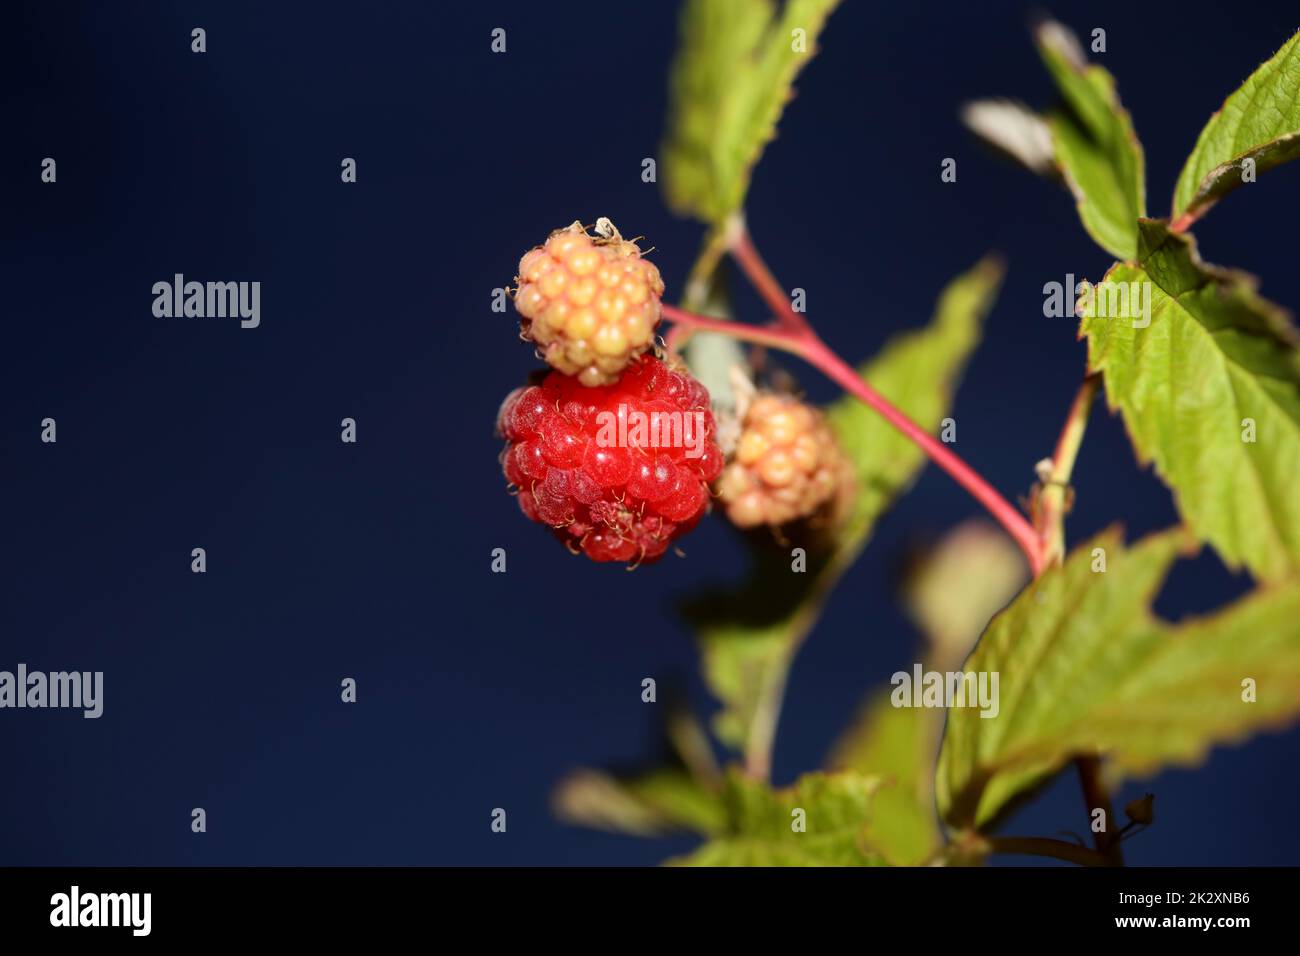 Wild red berry fruit close up modern botanical background rubus occidentalis family rosaceae high quality big size eating prints Stock Photo